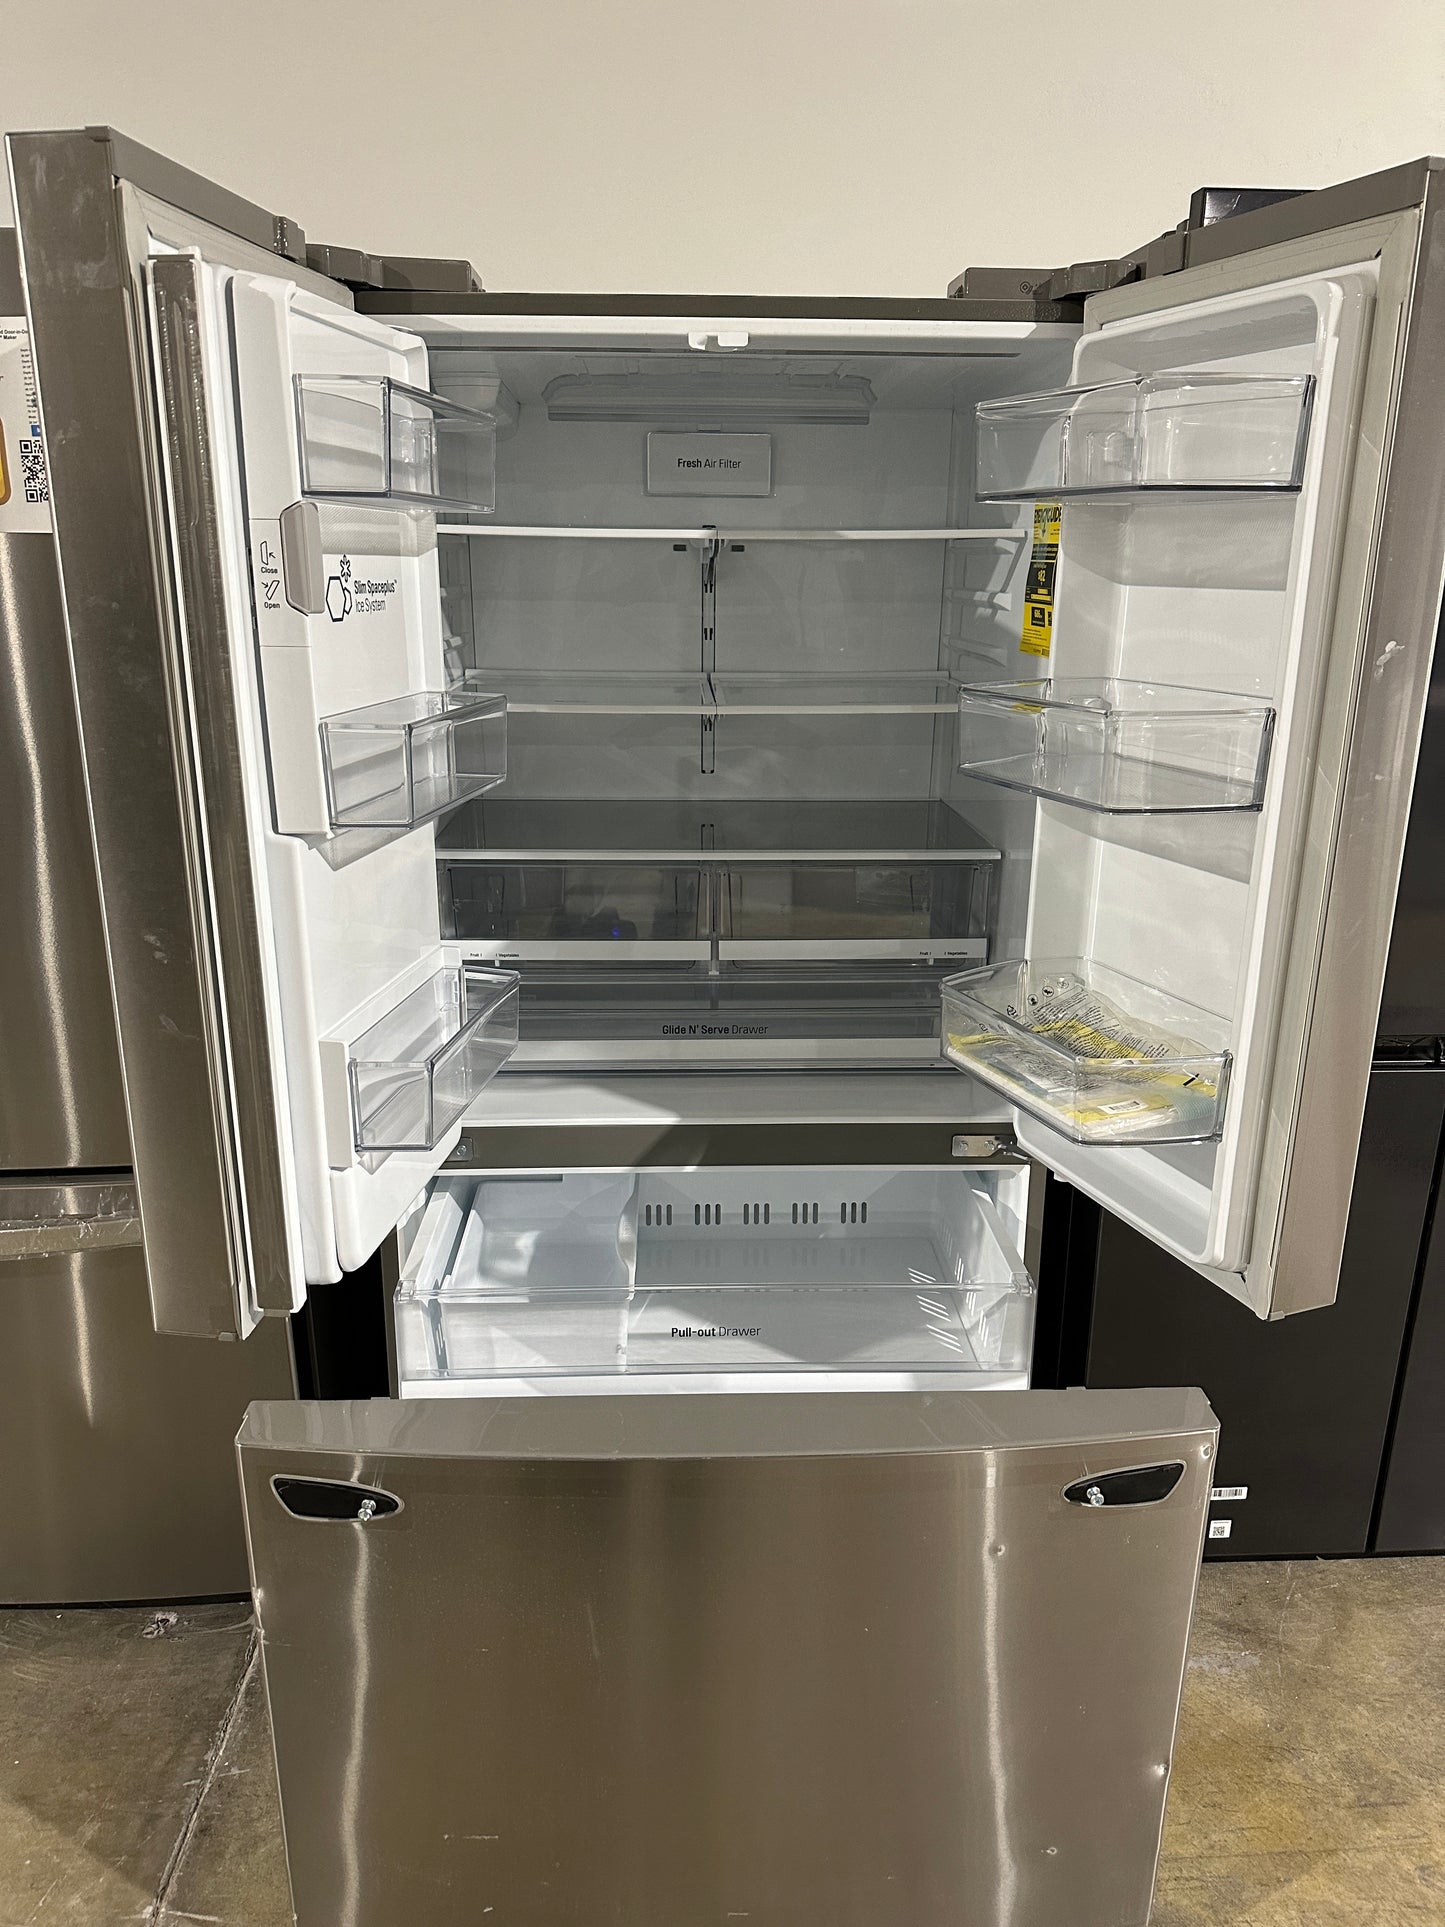 Smart Refrigerator with Dual Ice Maker - Stainless steel  Model:LFXS26973S  REF11594